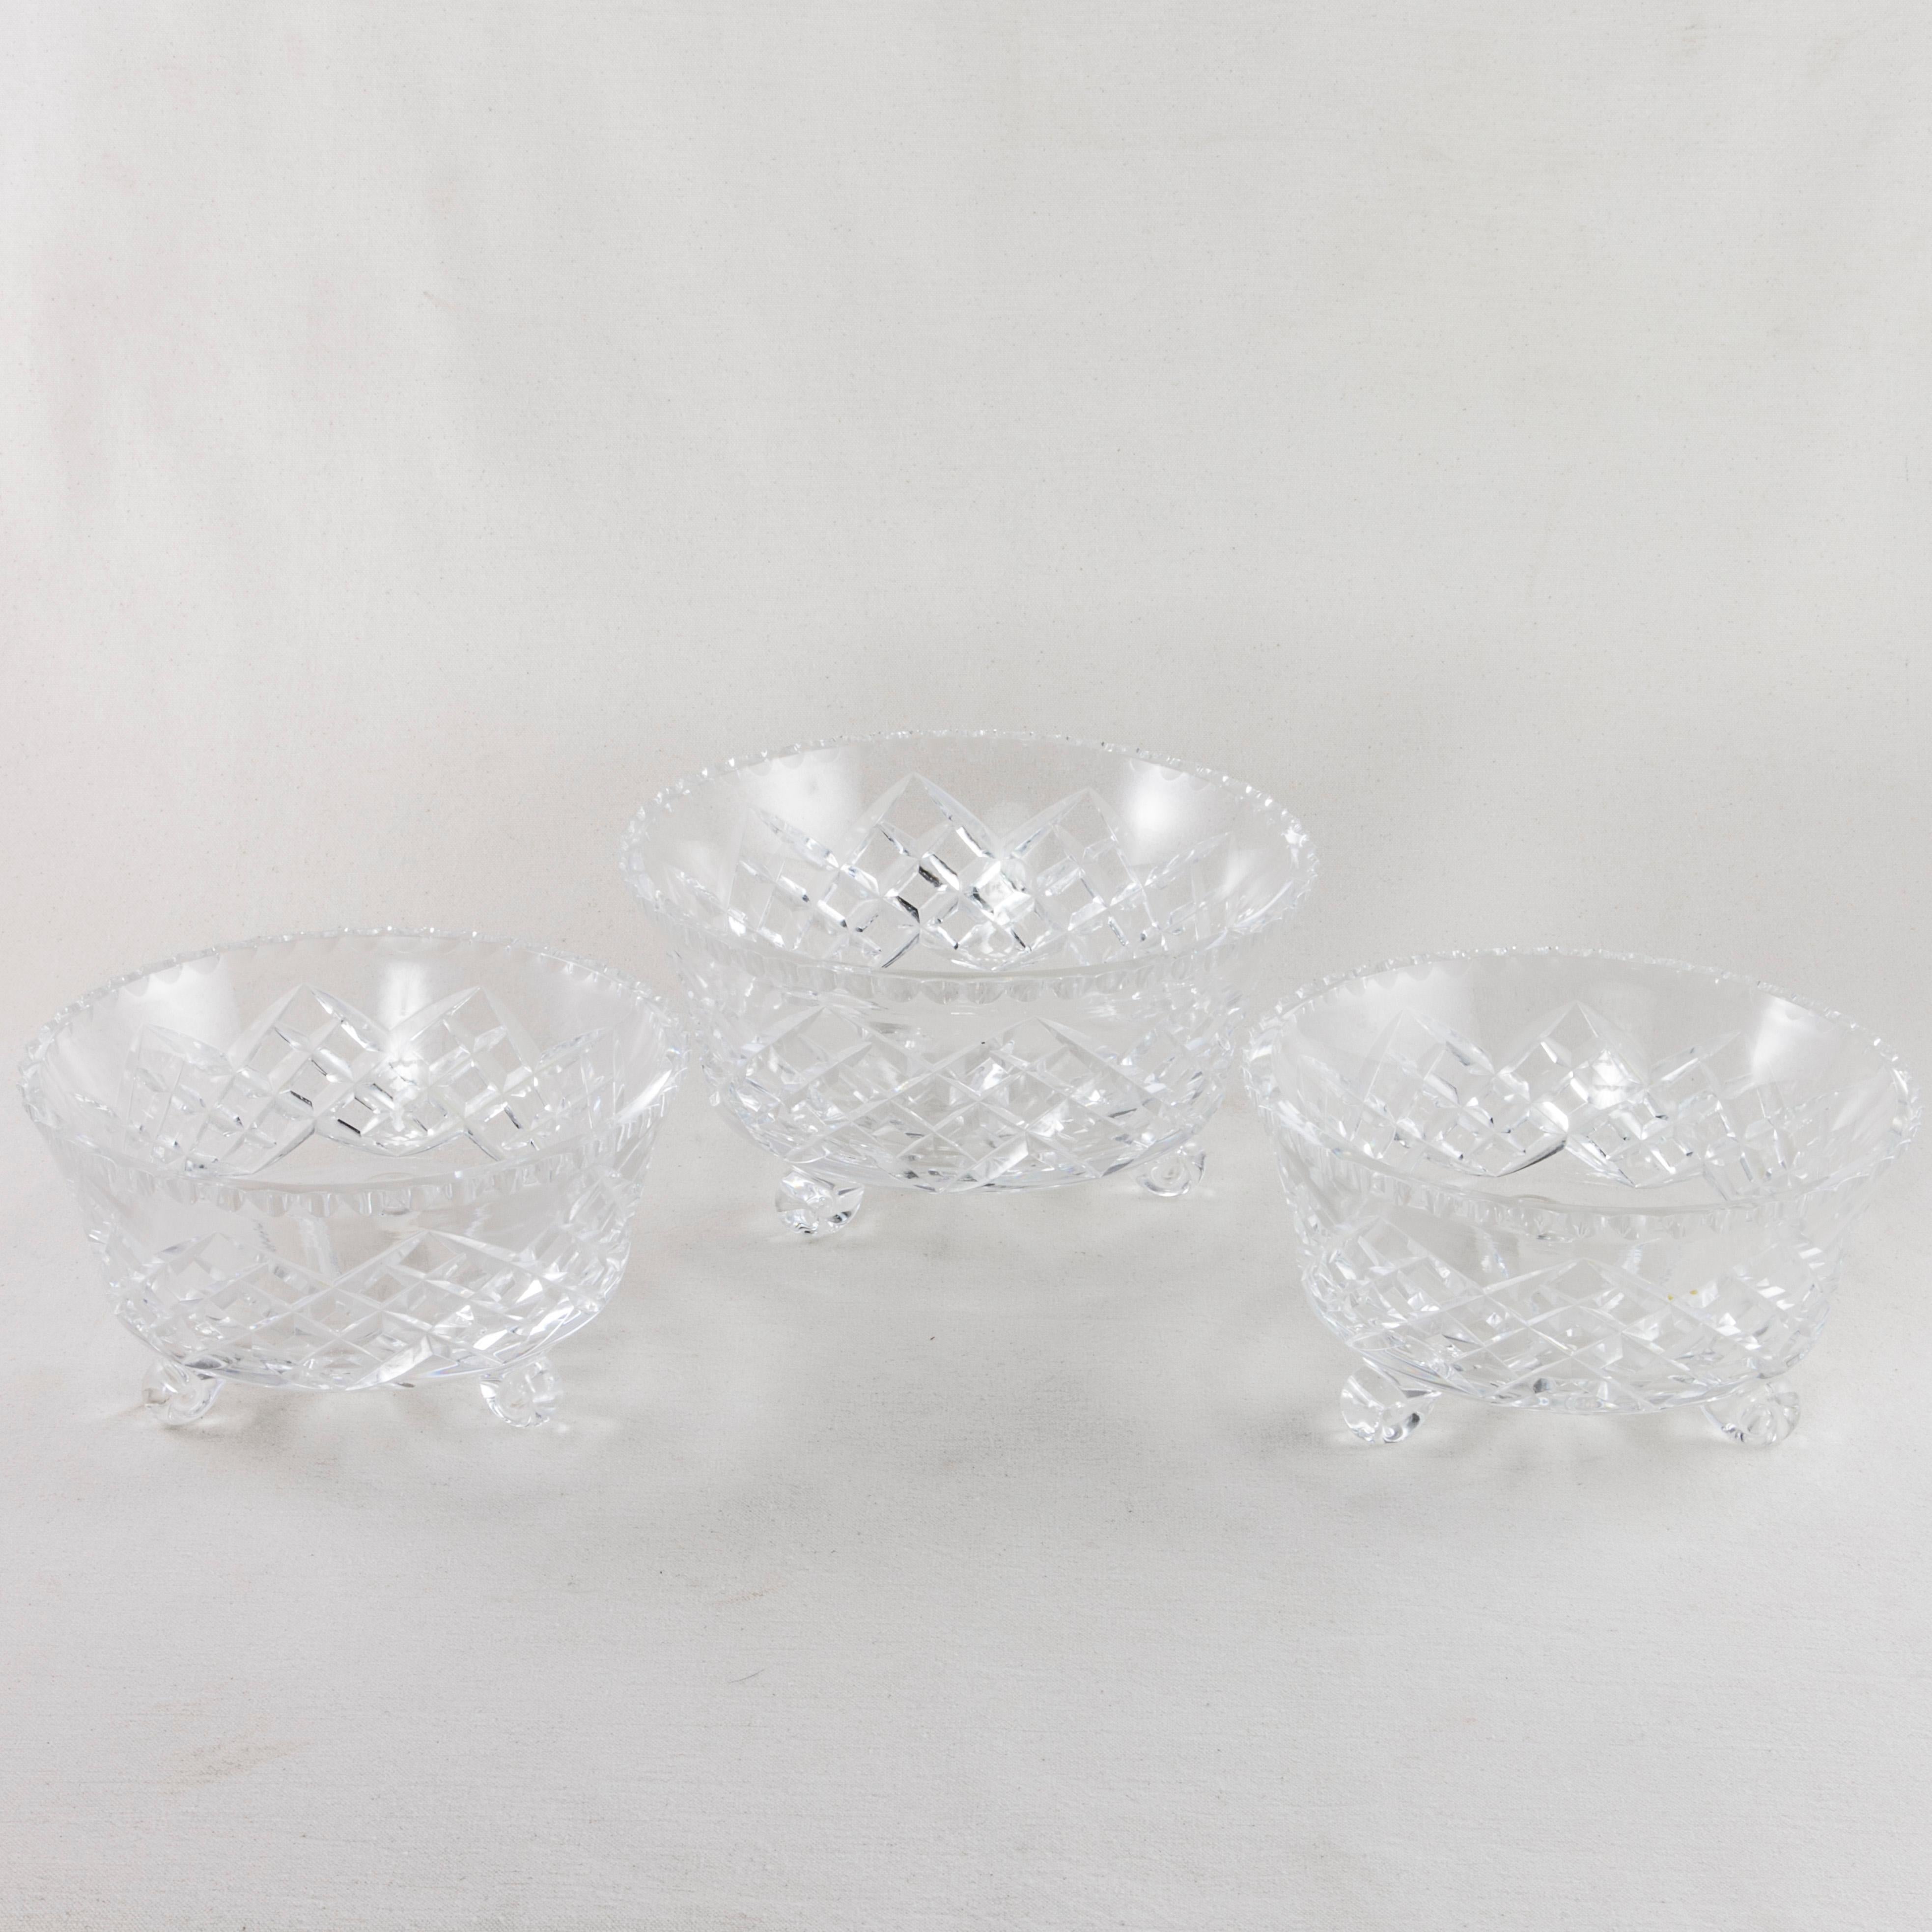 55-Piece Set French Baccarat Crystal Glasses, Decanters, Vases and Bowls 7